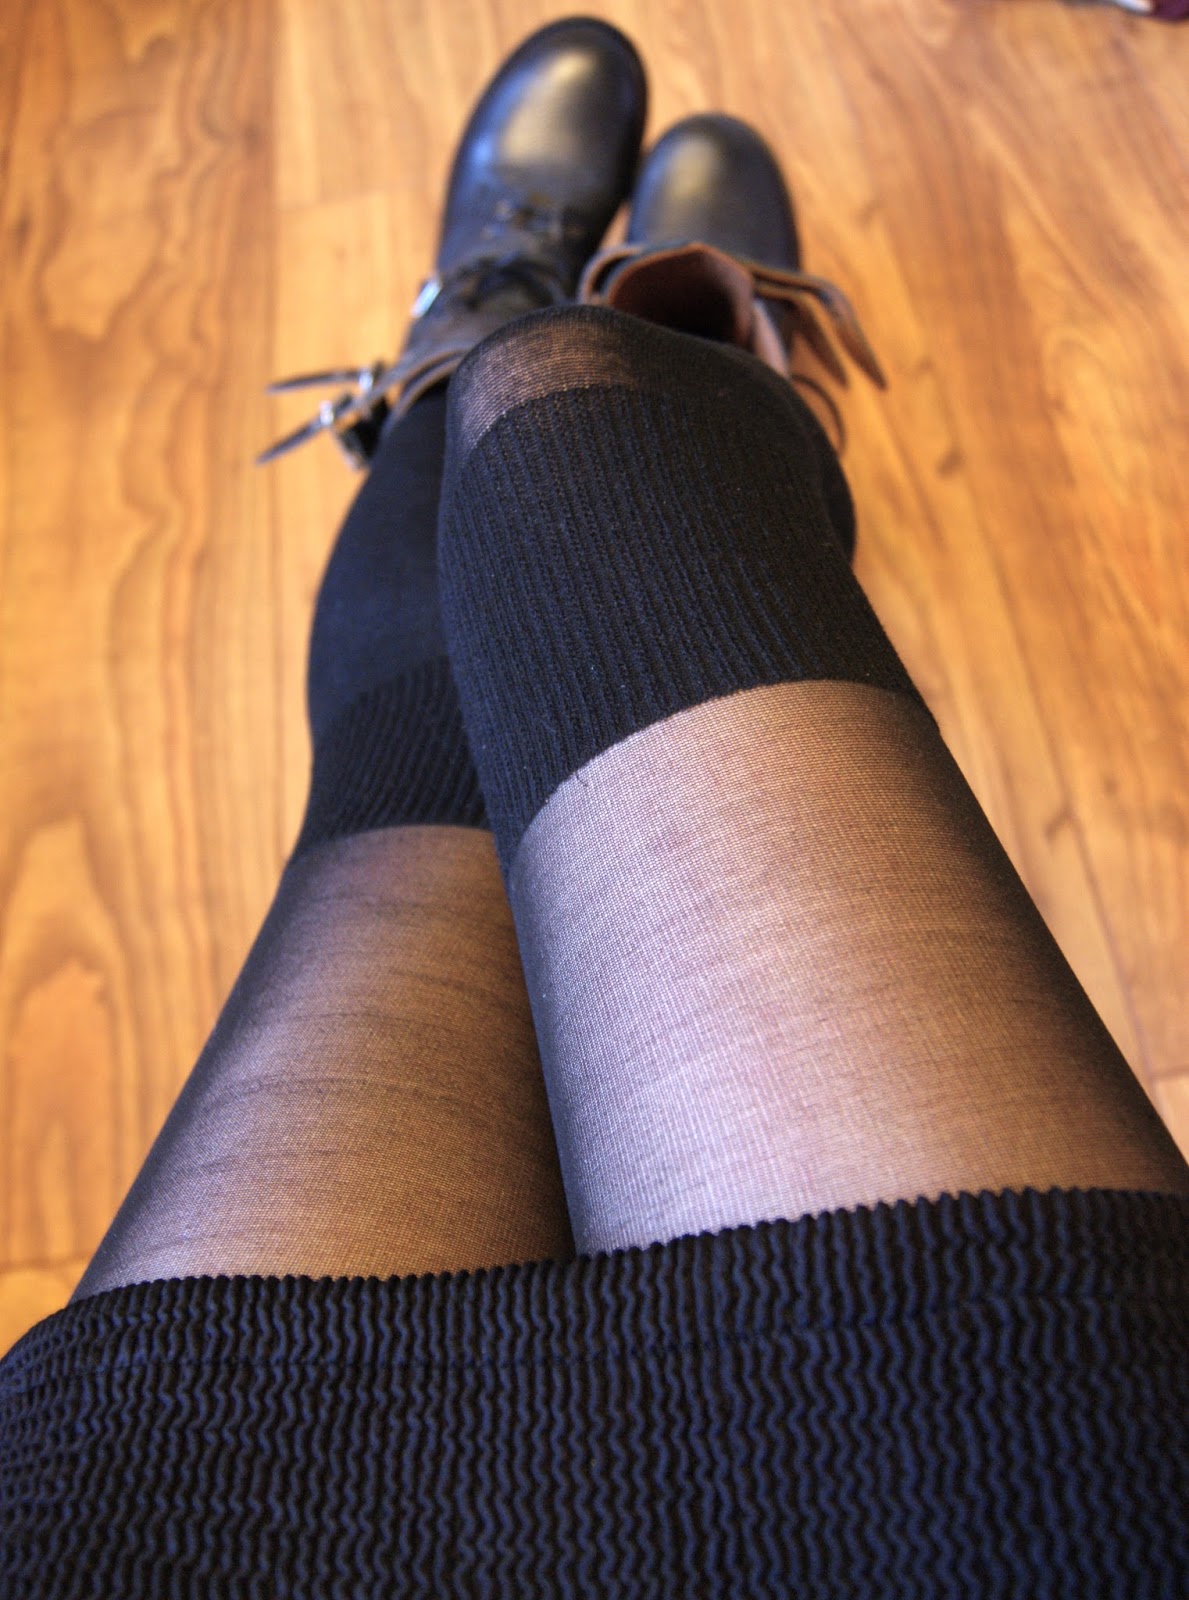 Tights and Ladders: Pretty Polly Tights - Secret Socks Review